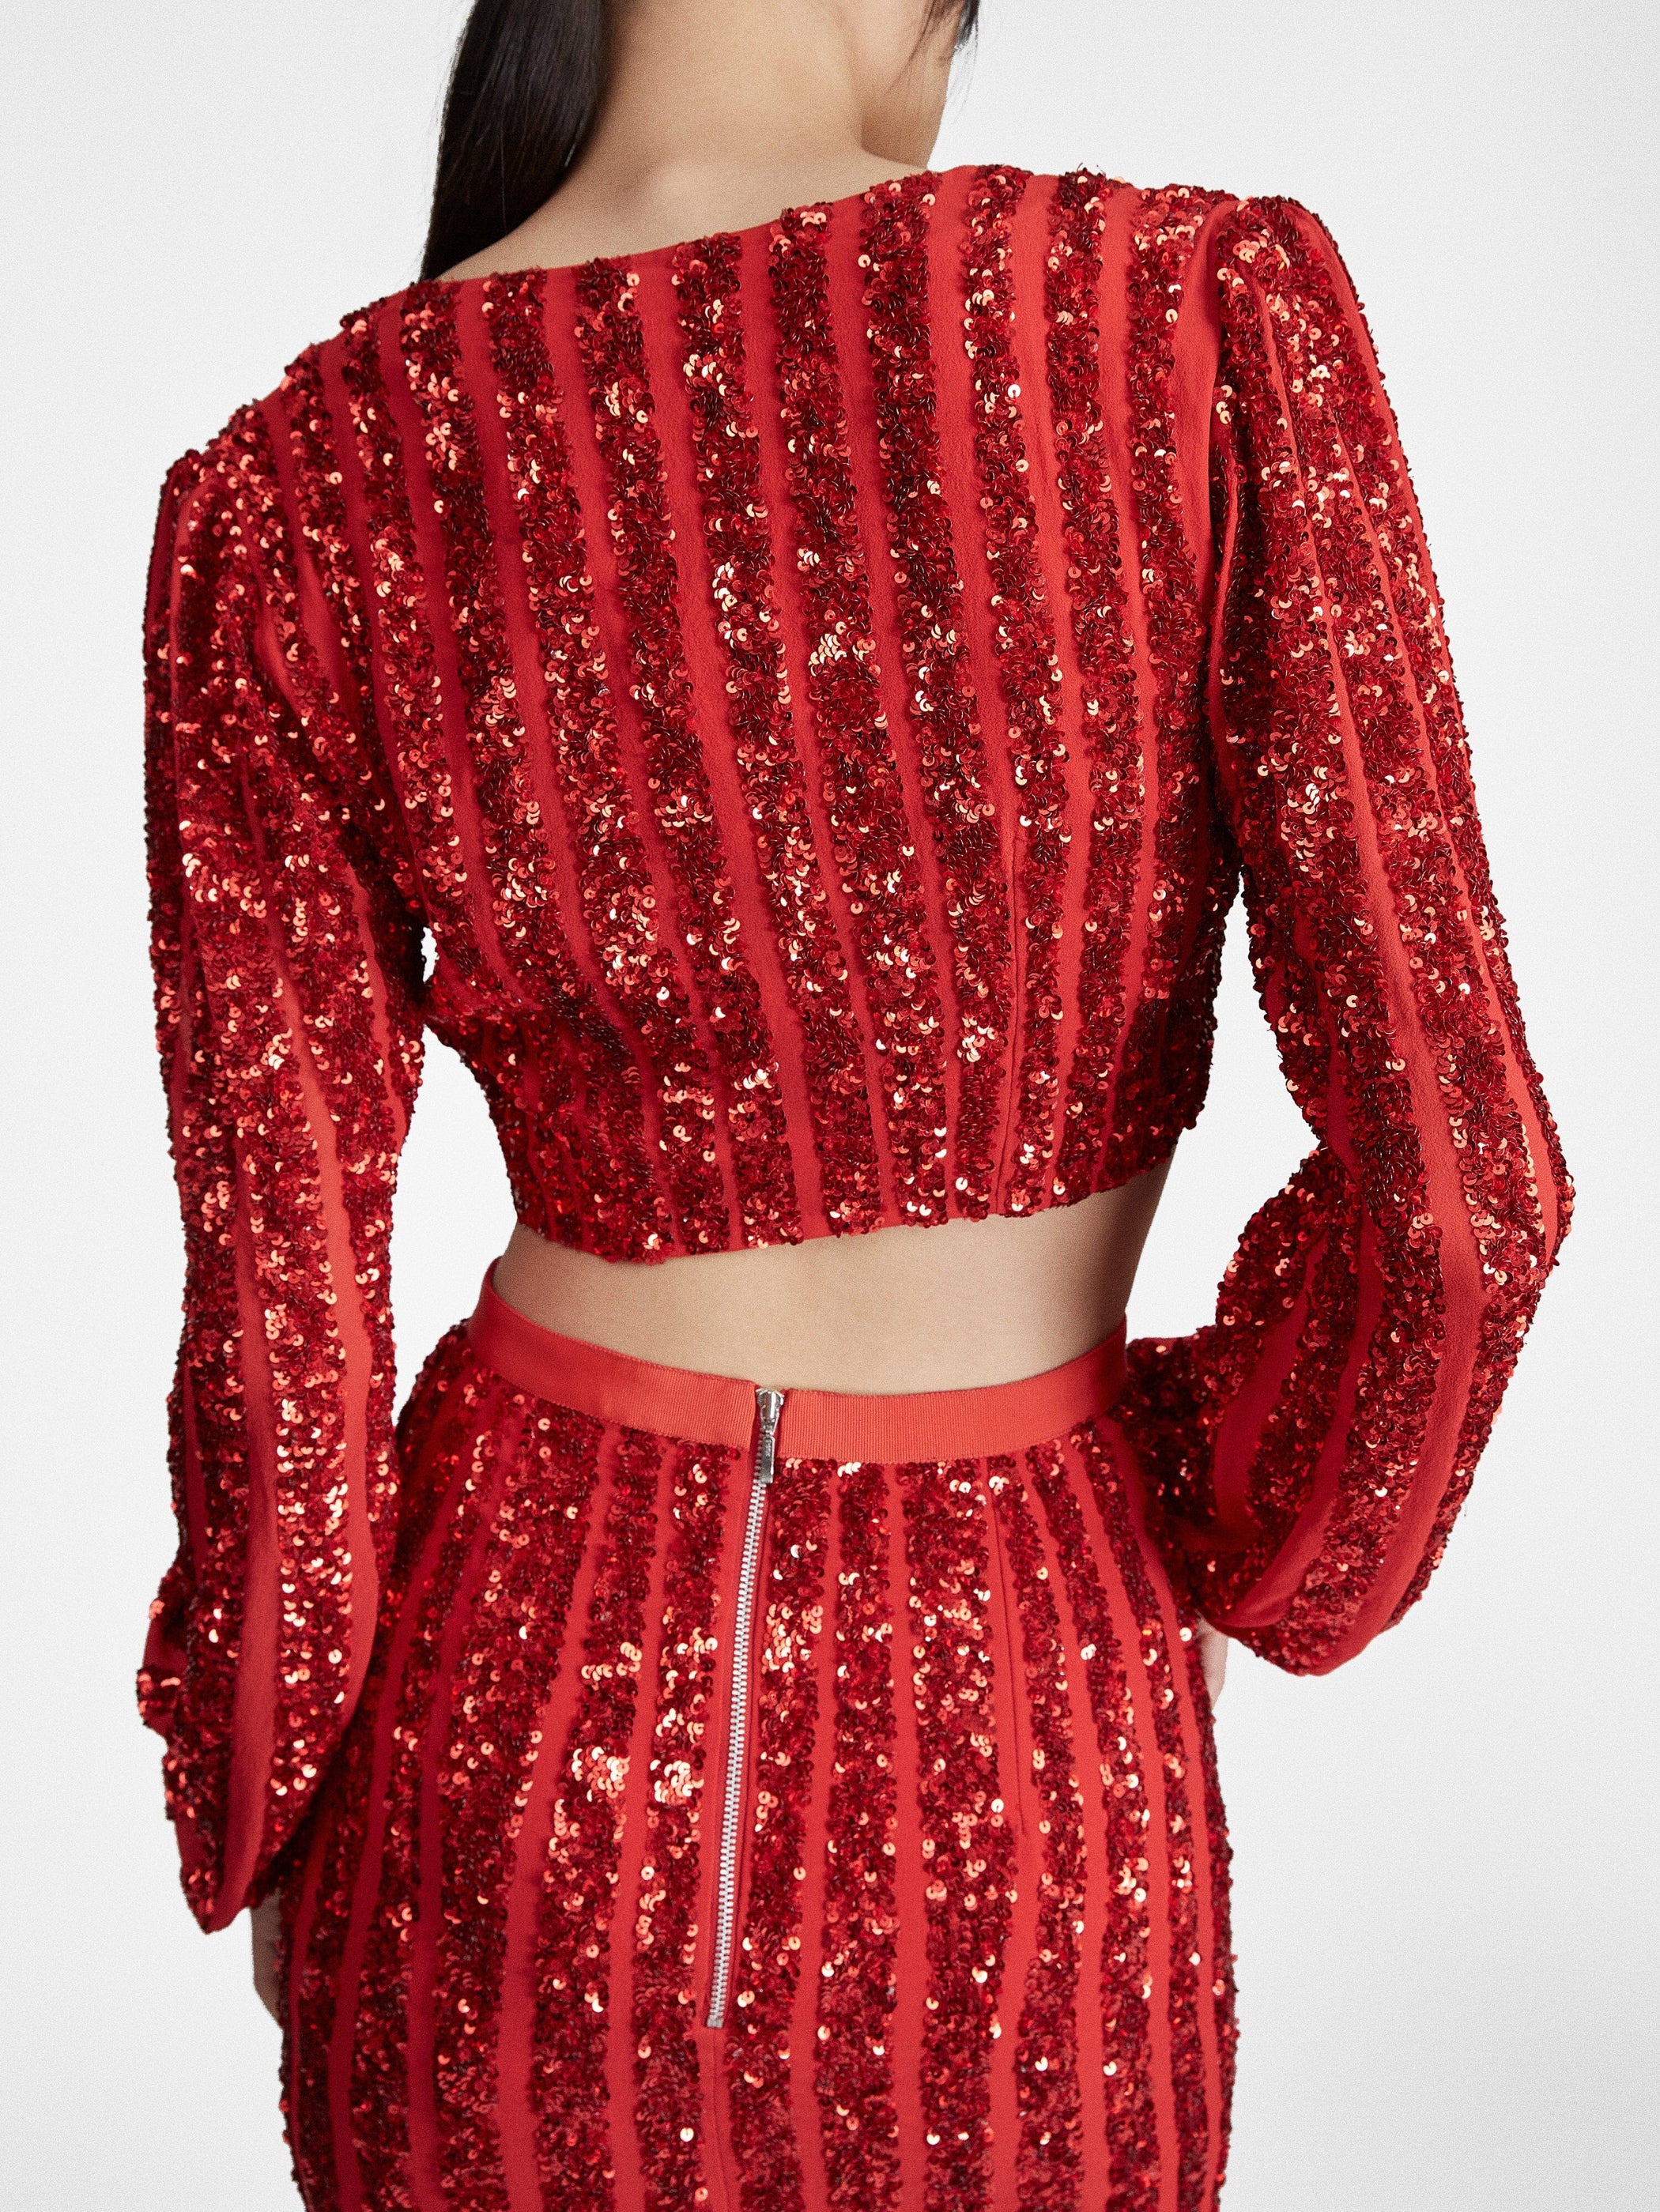 Venyx Camille Crop Top in Scarlet with Sequin Embroidery